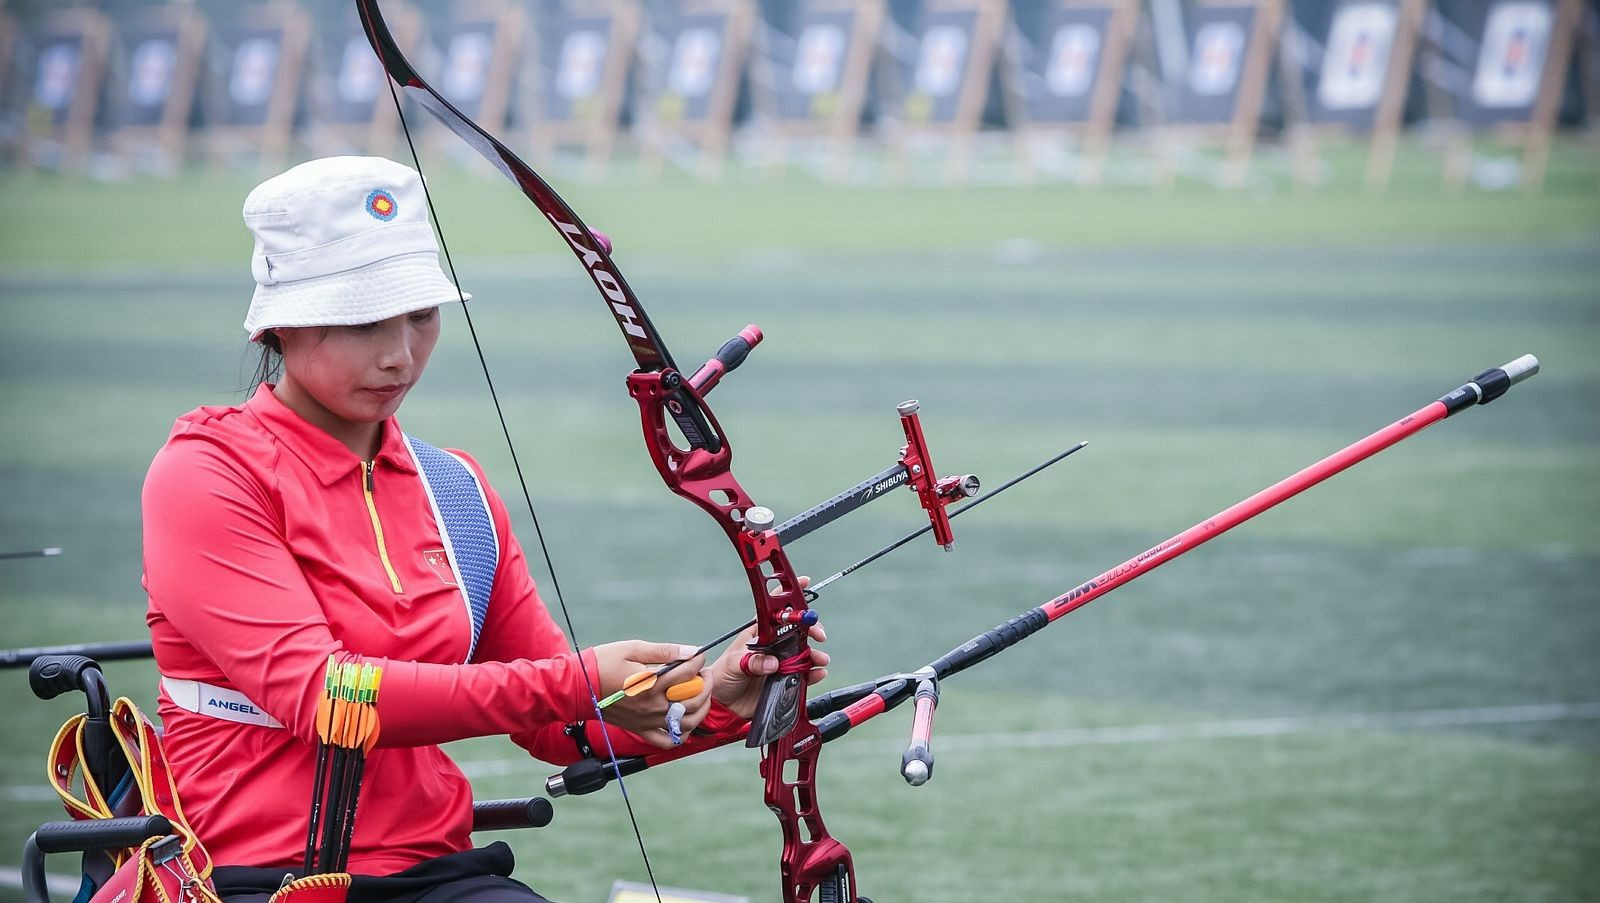 Six bronze medals were awarded at the 2017 World Archery Para Championships in Beijing today ©World Archery